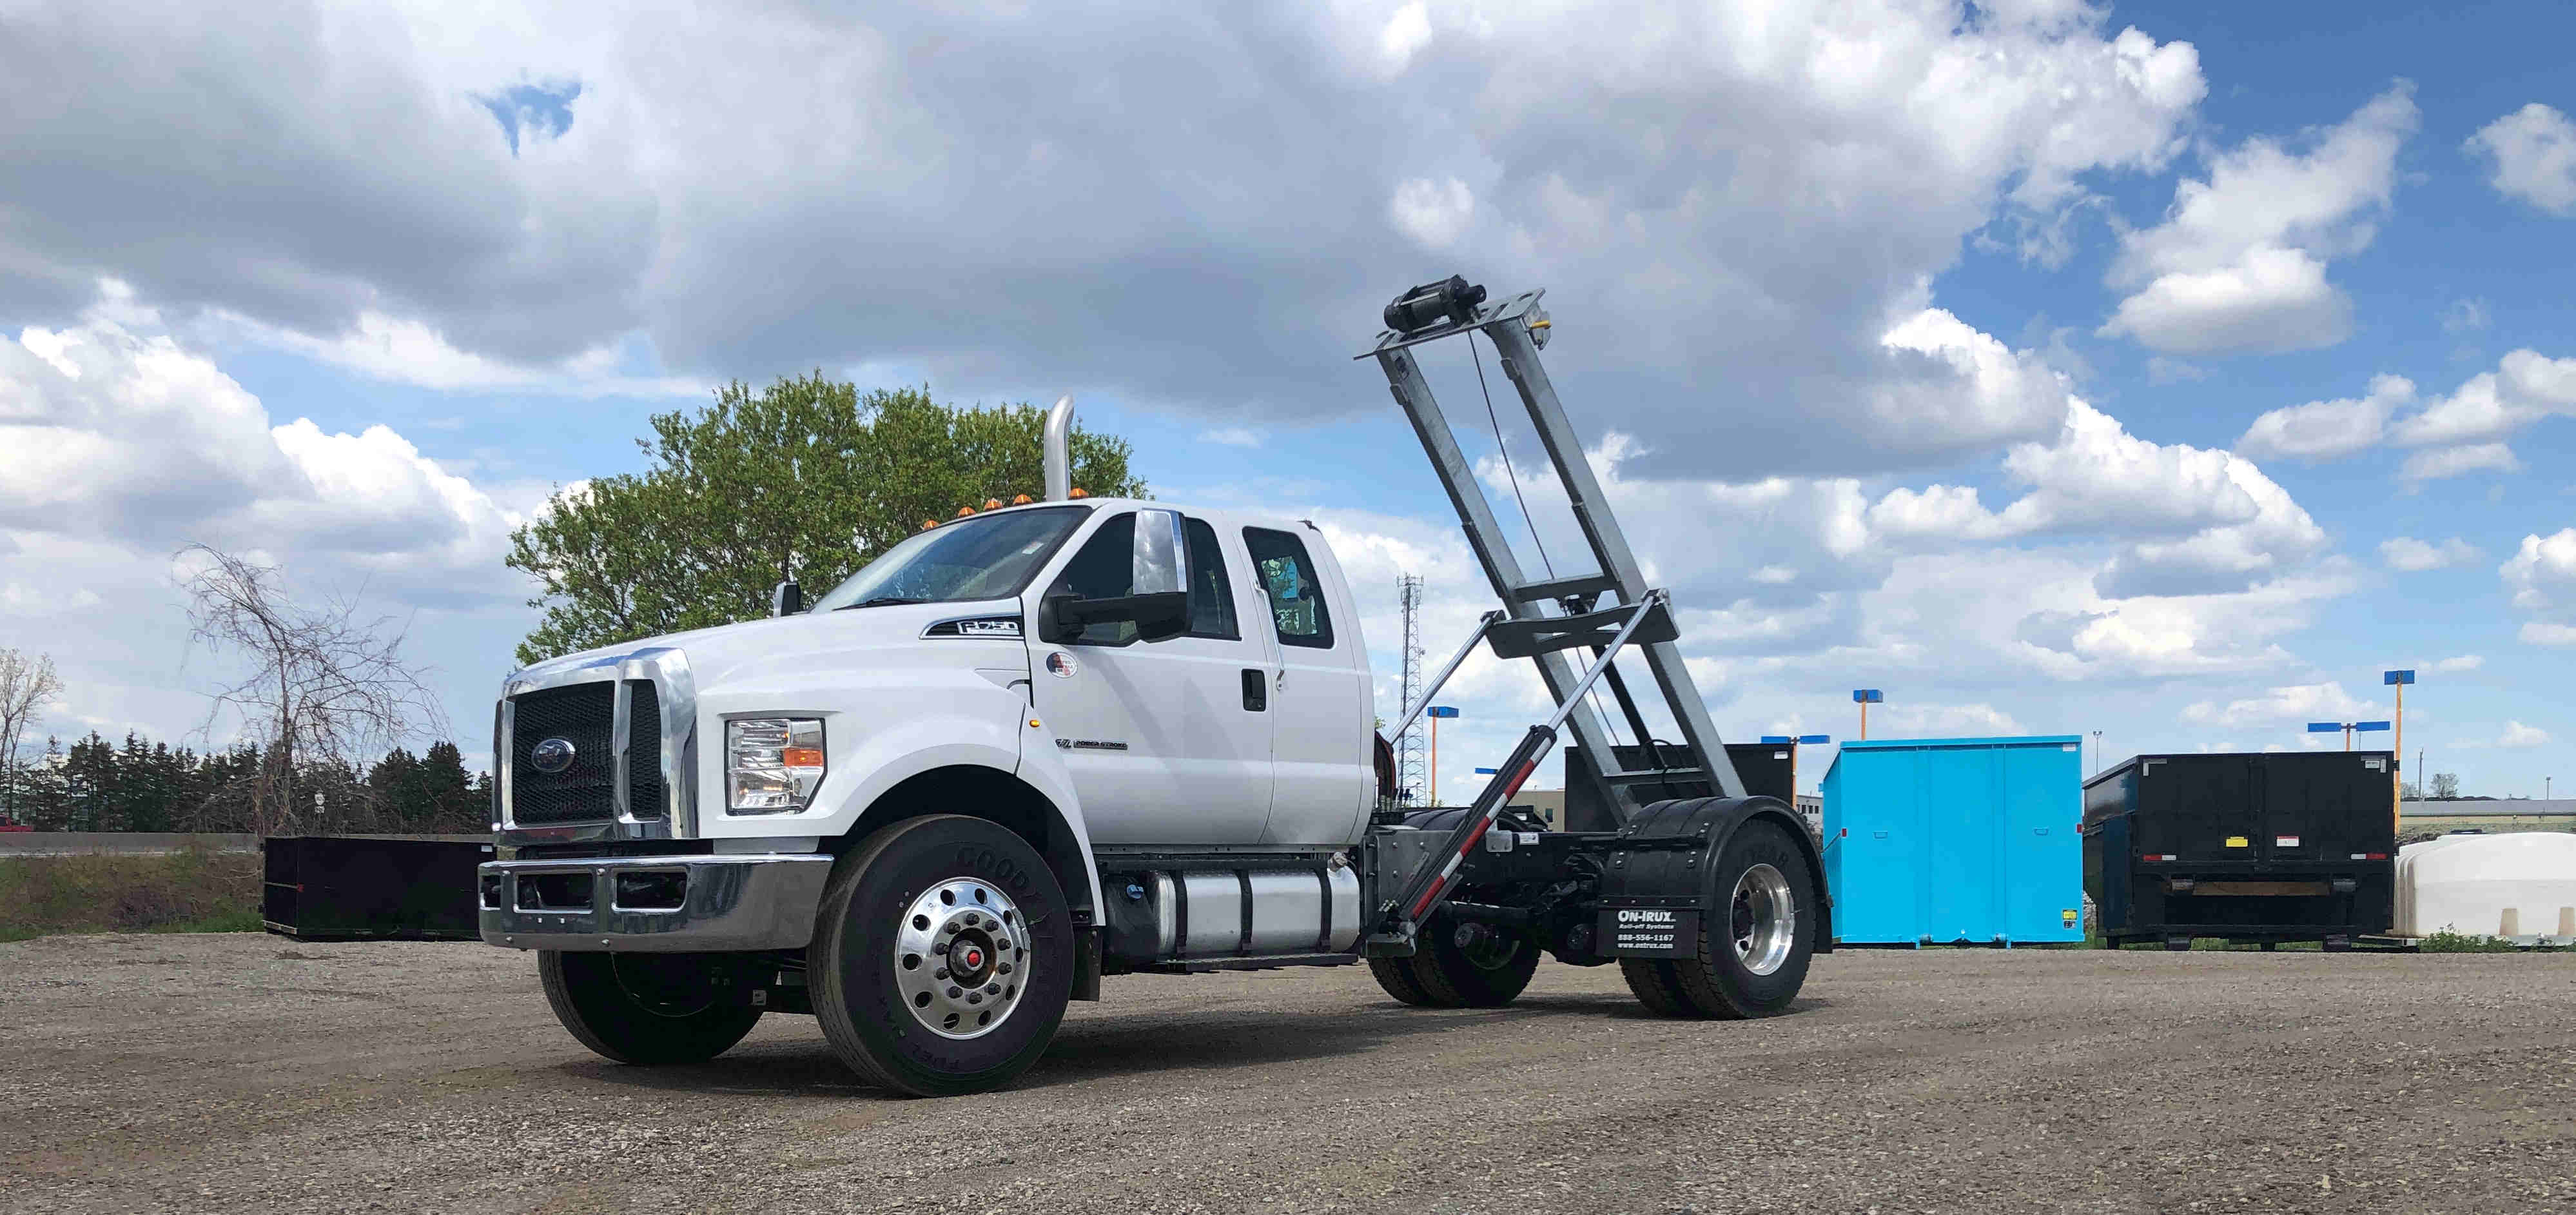 2021 Ford F750 12 On Trux System White (1)